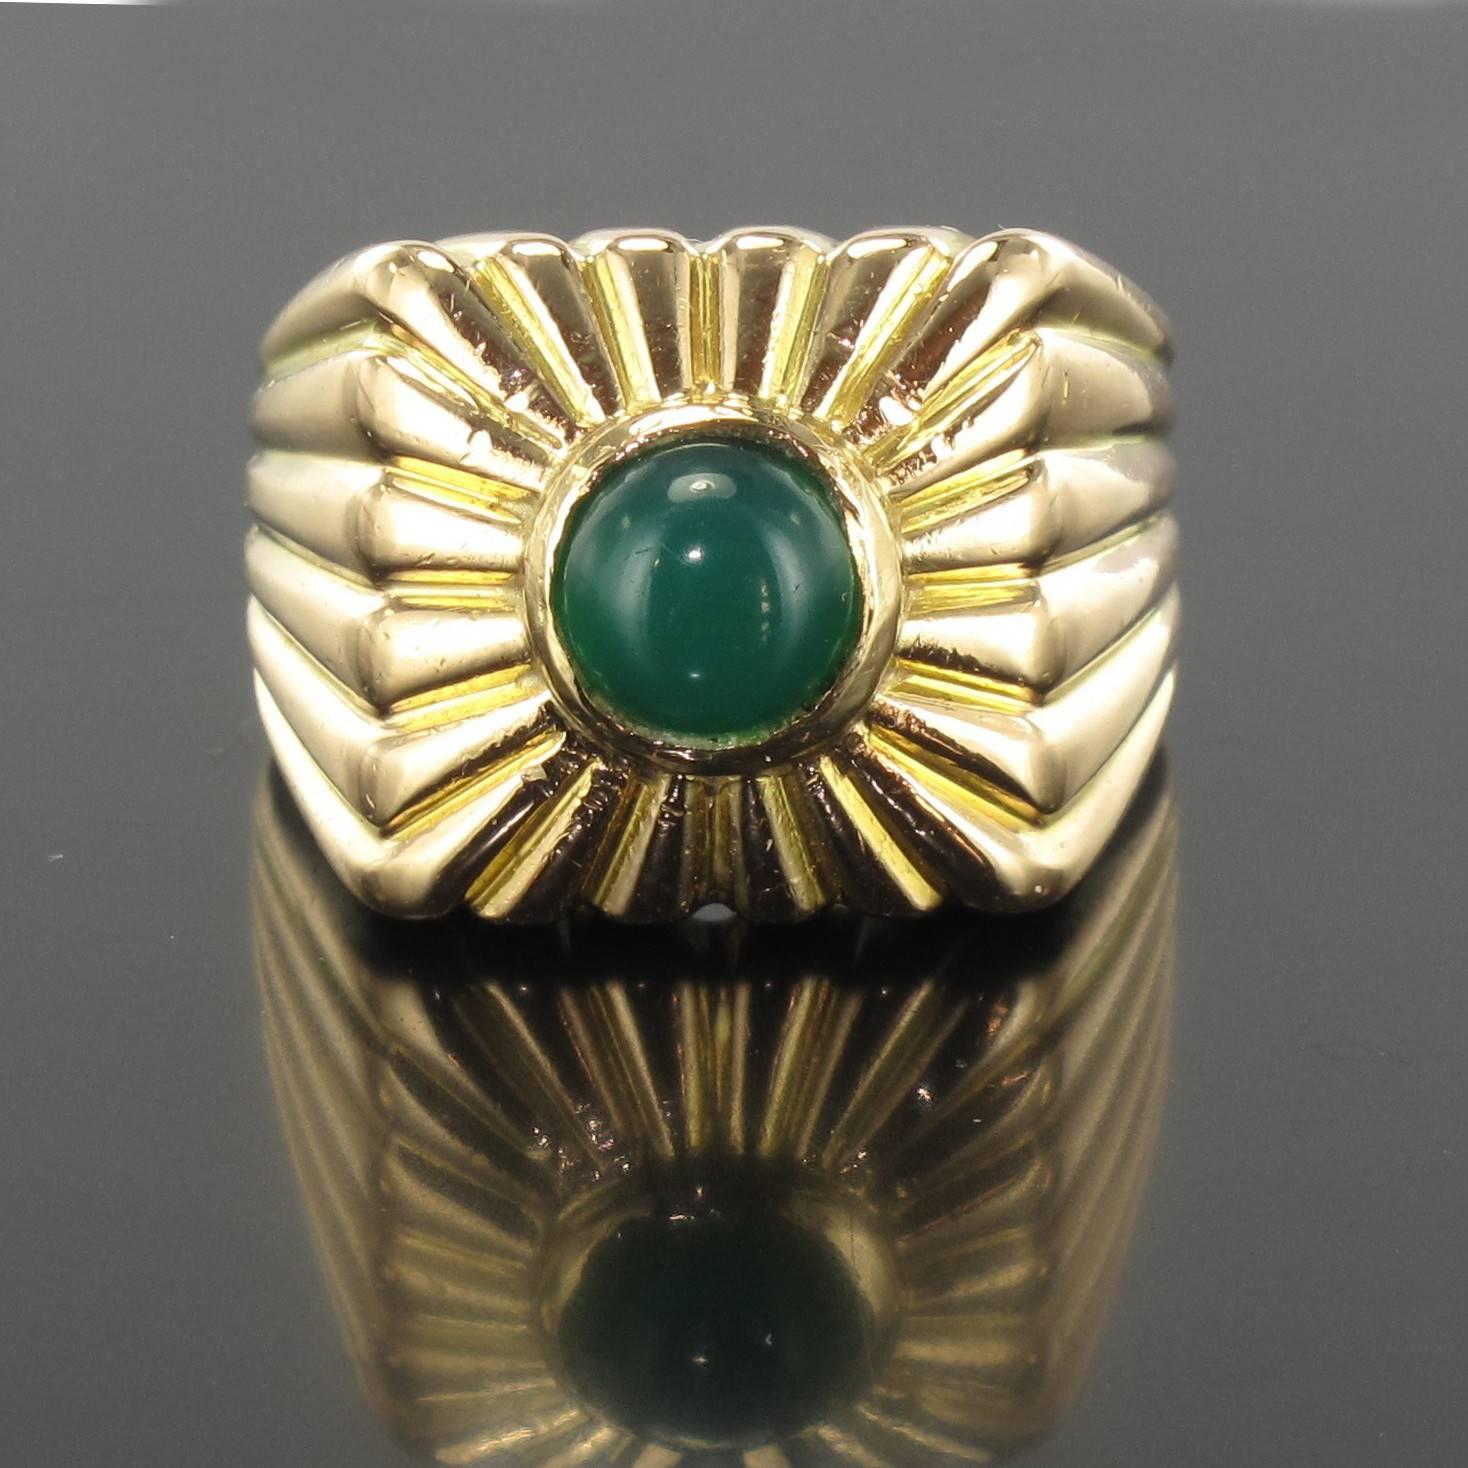 Ring in 18 carat yellow gold, eagle head hallmark. 

This large square shaped signet ring is chiselled with gold fluted inlay and features a bezel set chrysoprase cabochon. 

Chrysoprase weight: about 1.05 carat.
Height: 1.5 cm width: 1.5 cm,